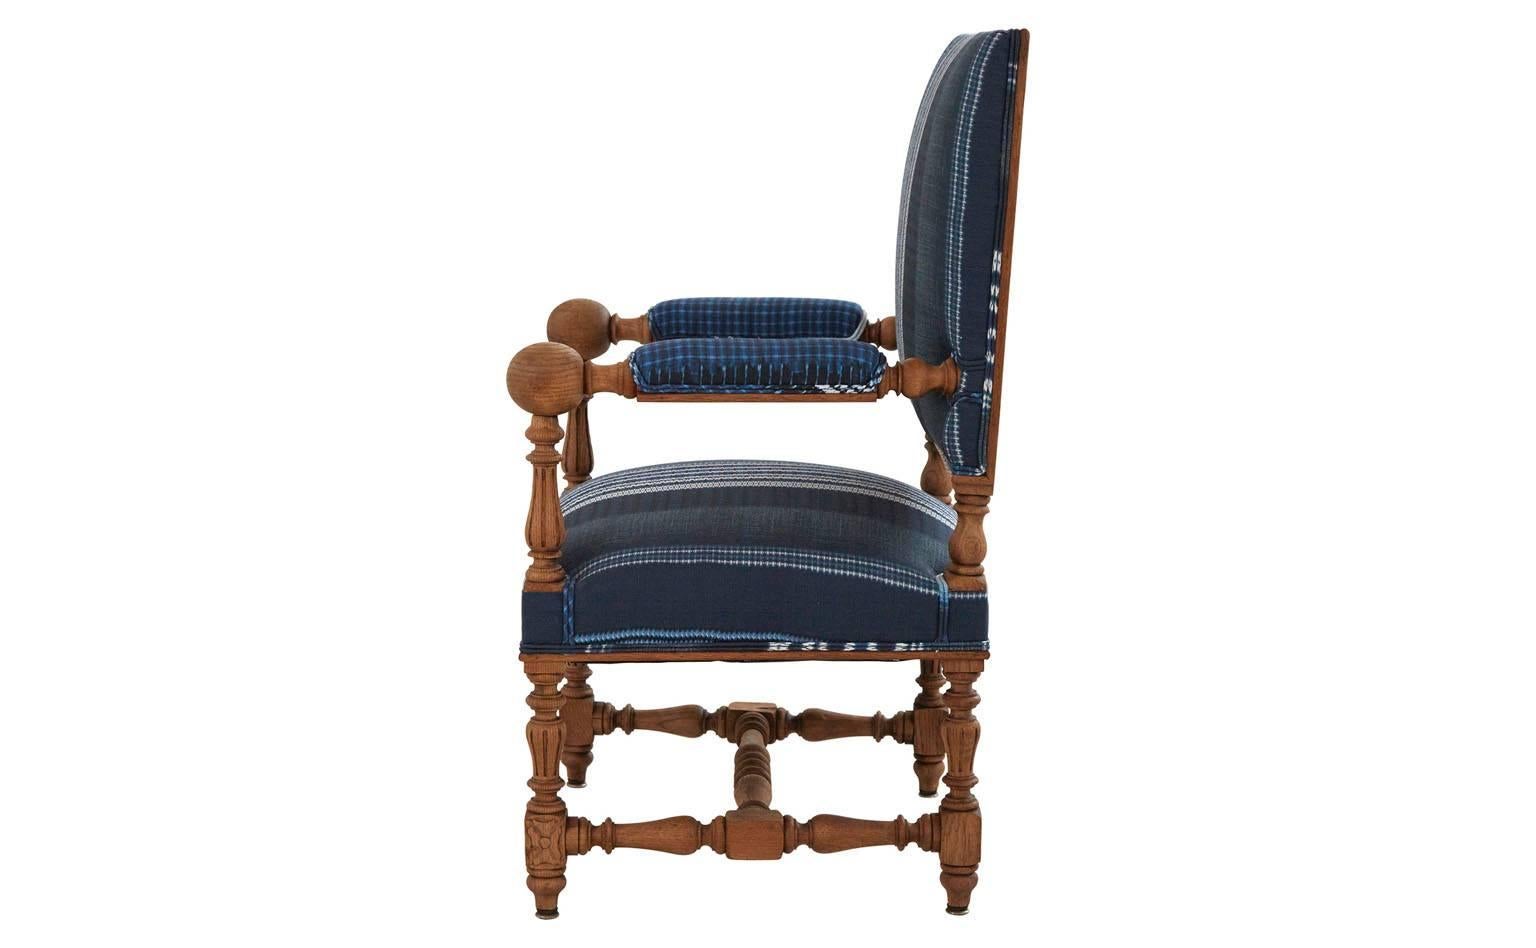 Reupholstered in festival stripe indigo linen.
Stripped wood frame.
20th century.
France.

Dimensions:
Overall: 22'D x 26.5'W x 42.5'H
Seat height: 18'H
Arm height: 28'H